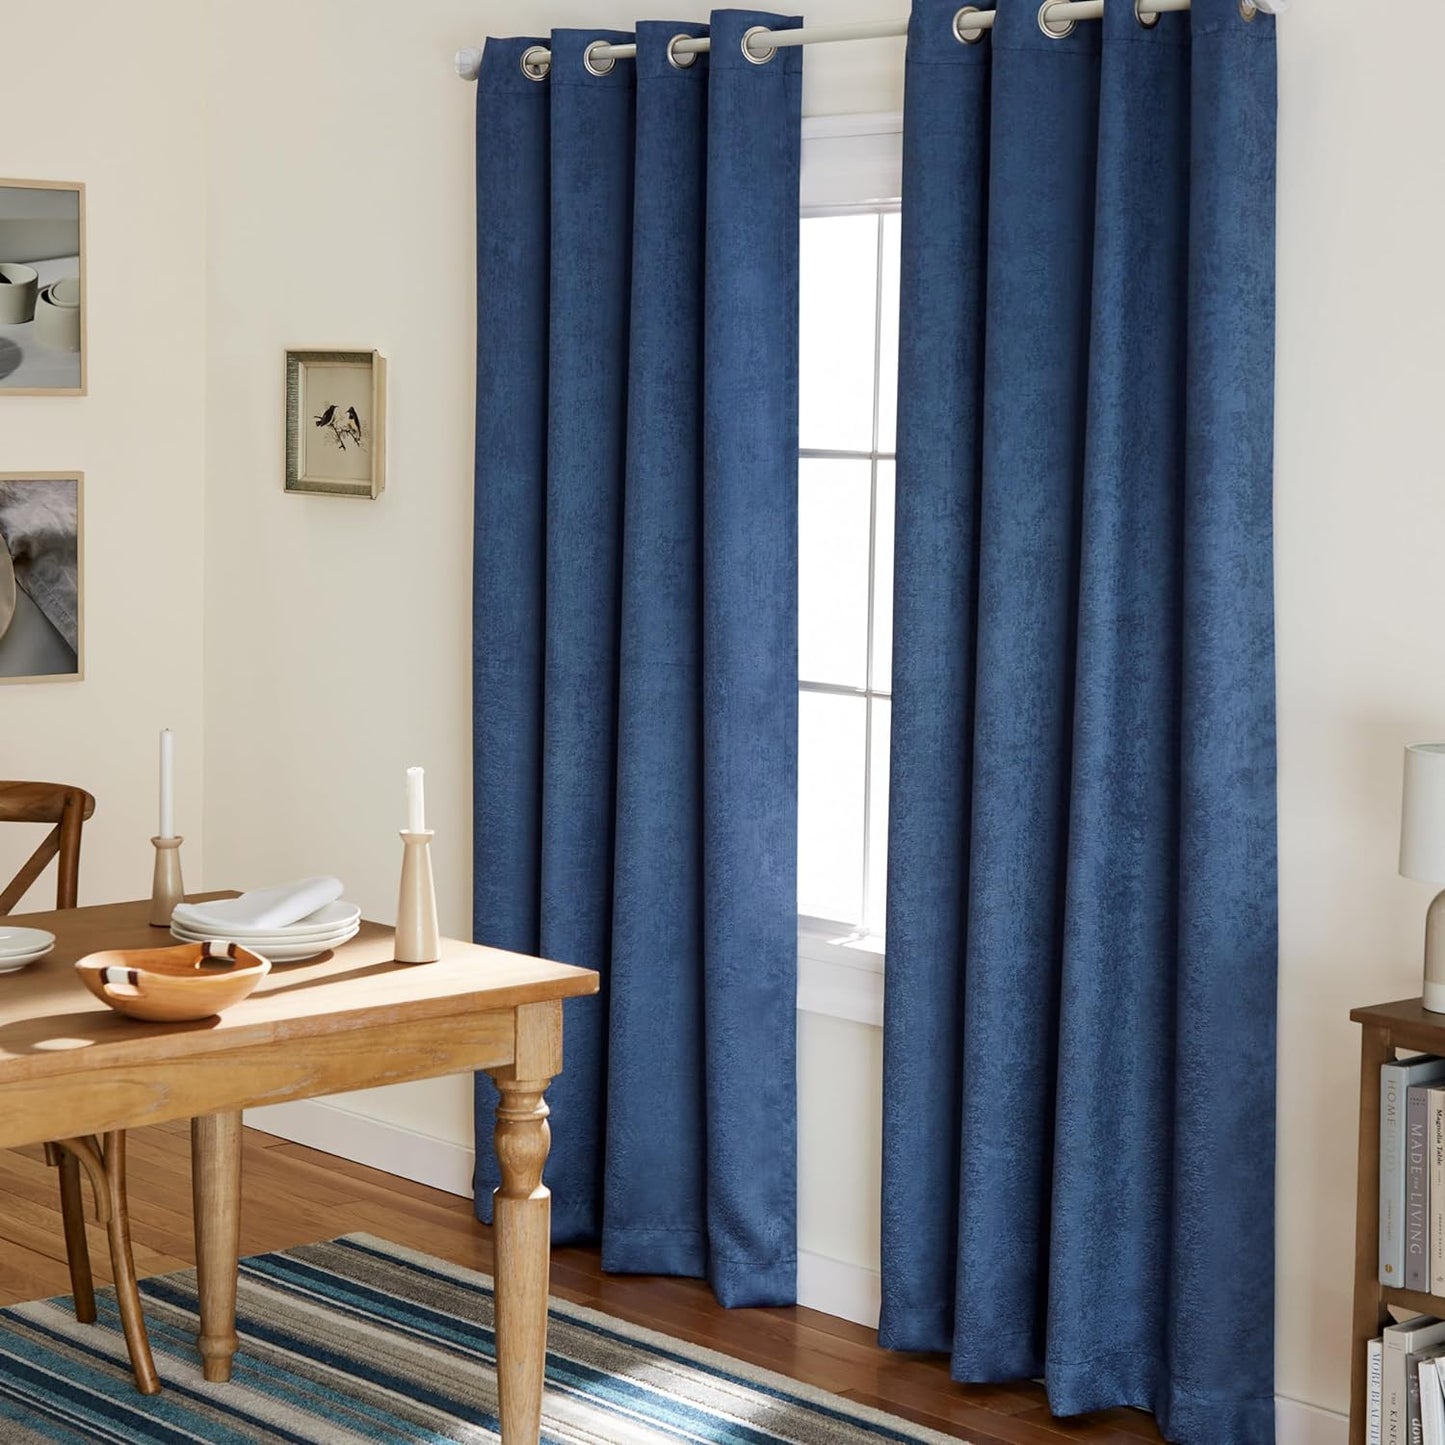 Exclusive Home Oxford Textured Sateen Room Darkening Blackout Grommet Top Curtain Panel Pair, 52"X108", Navy  Exclusive Home Curtains Slate Blue 52X96 